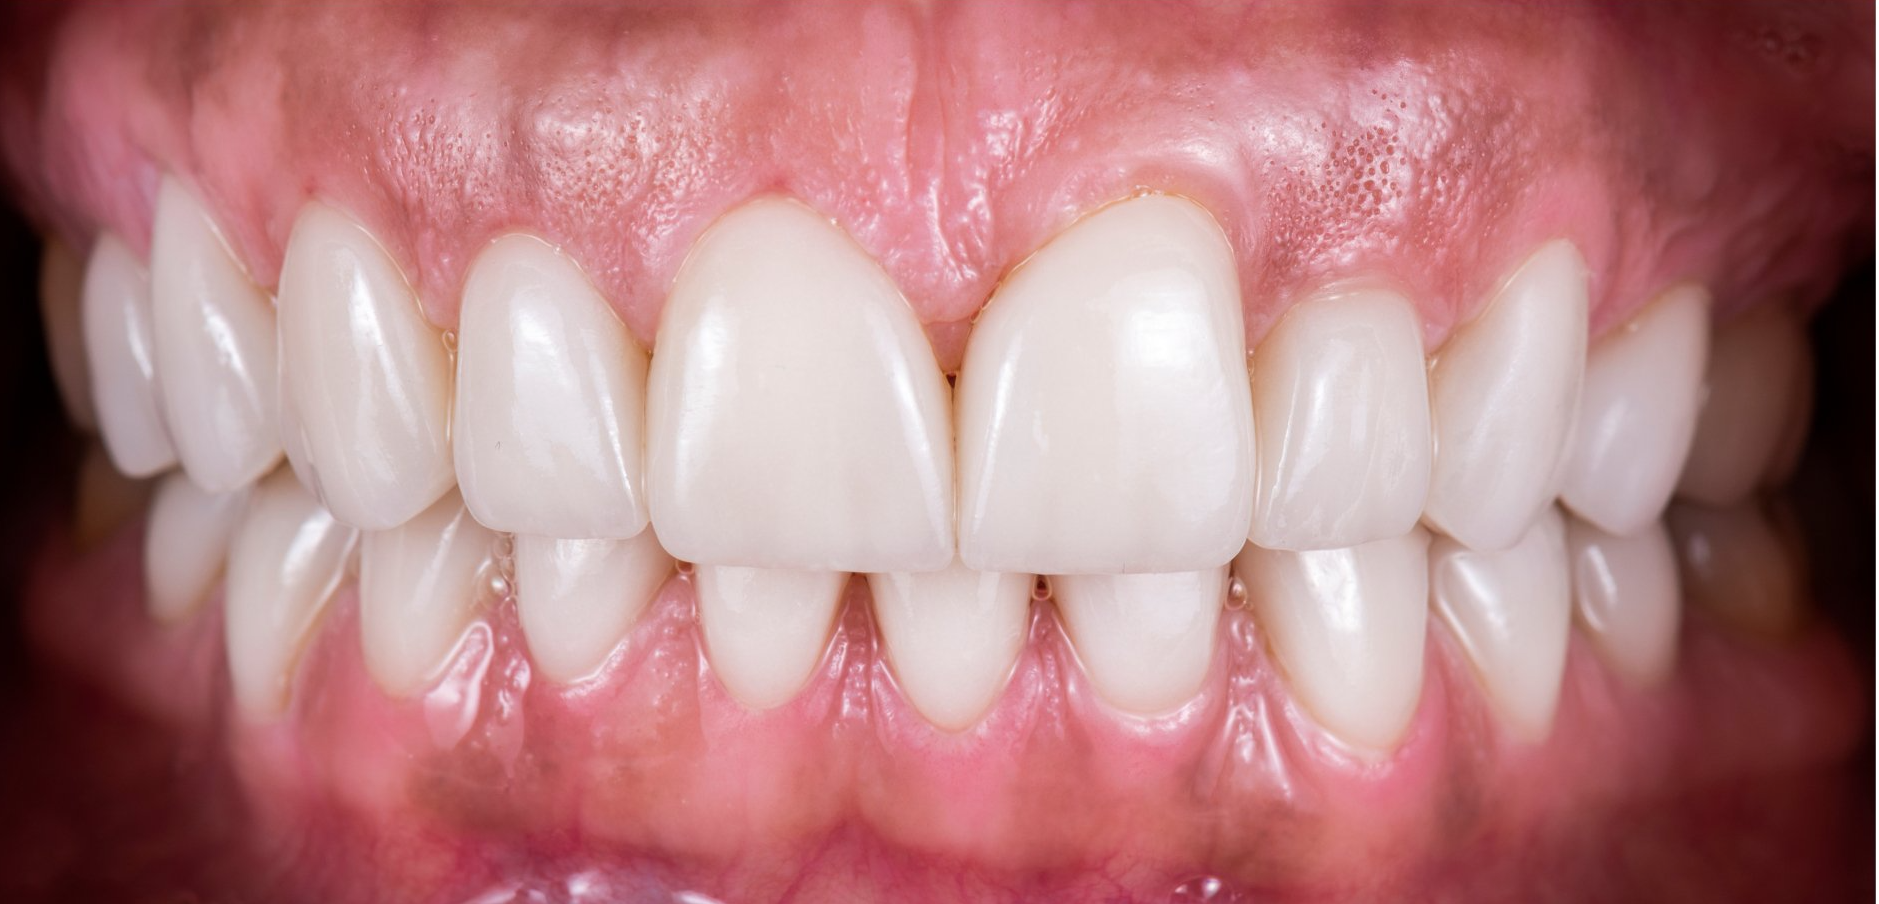 A close up of a person 's teeth with white teeth.